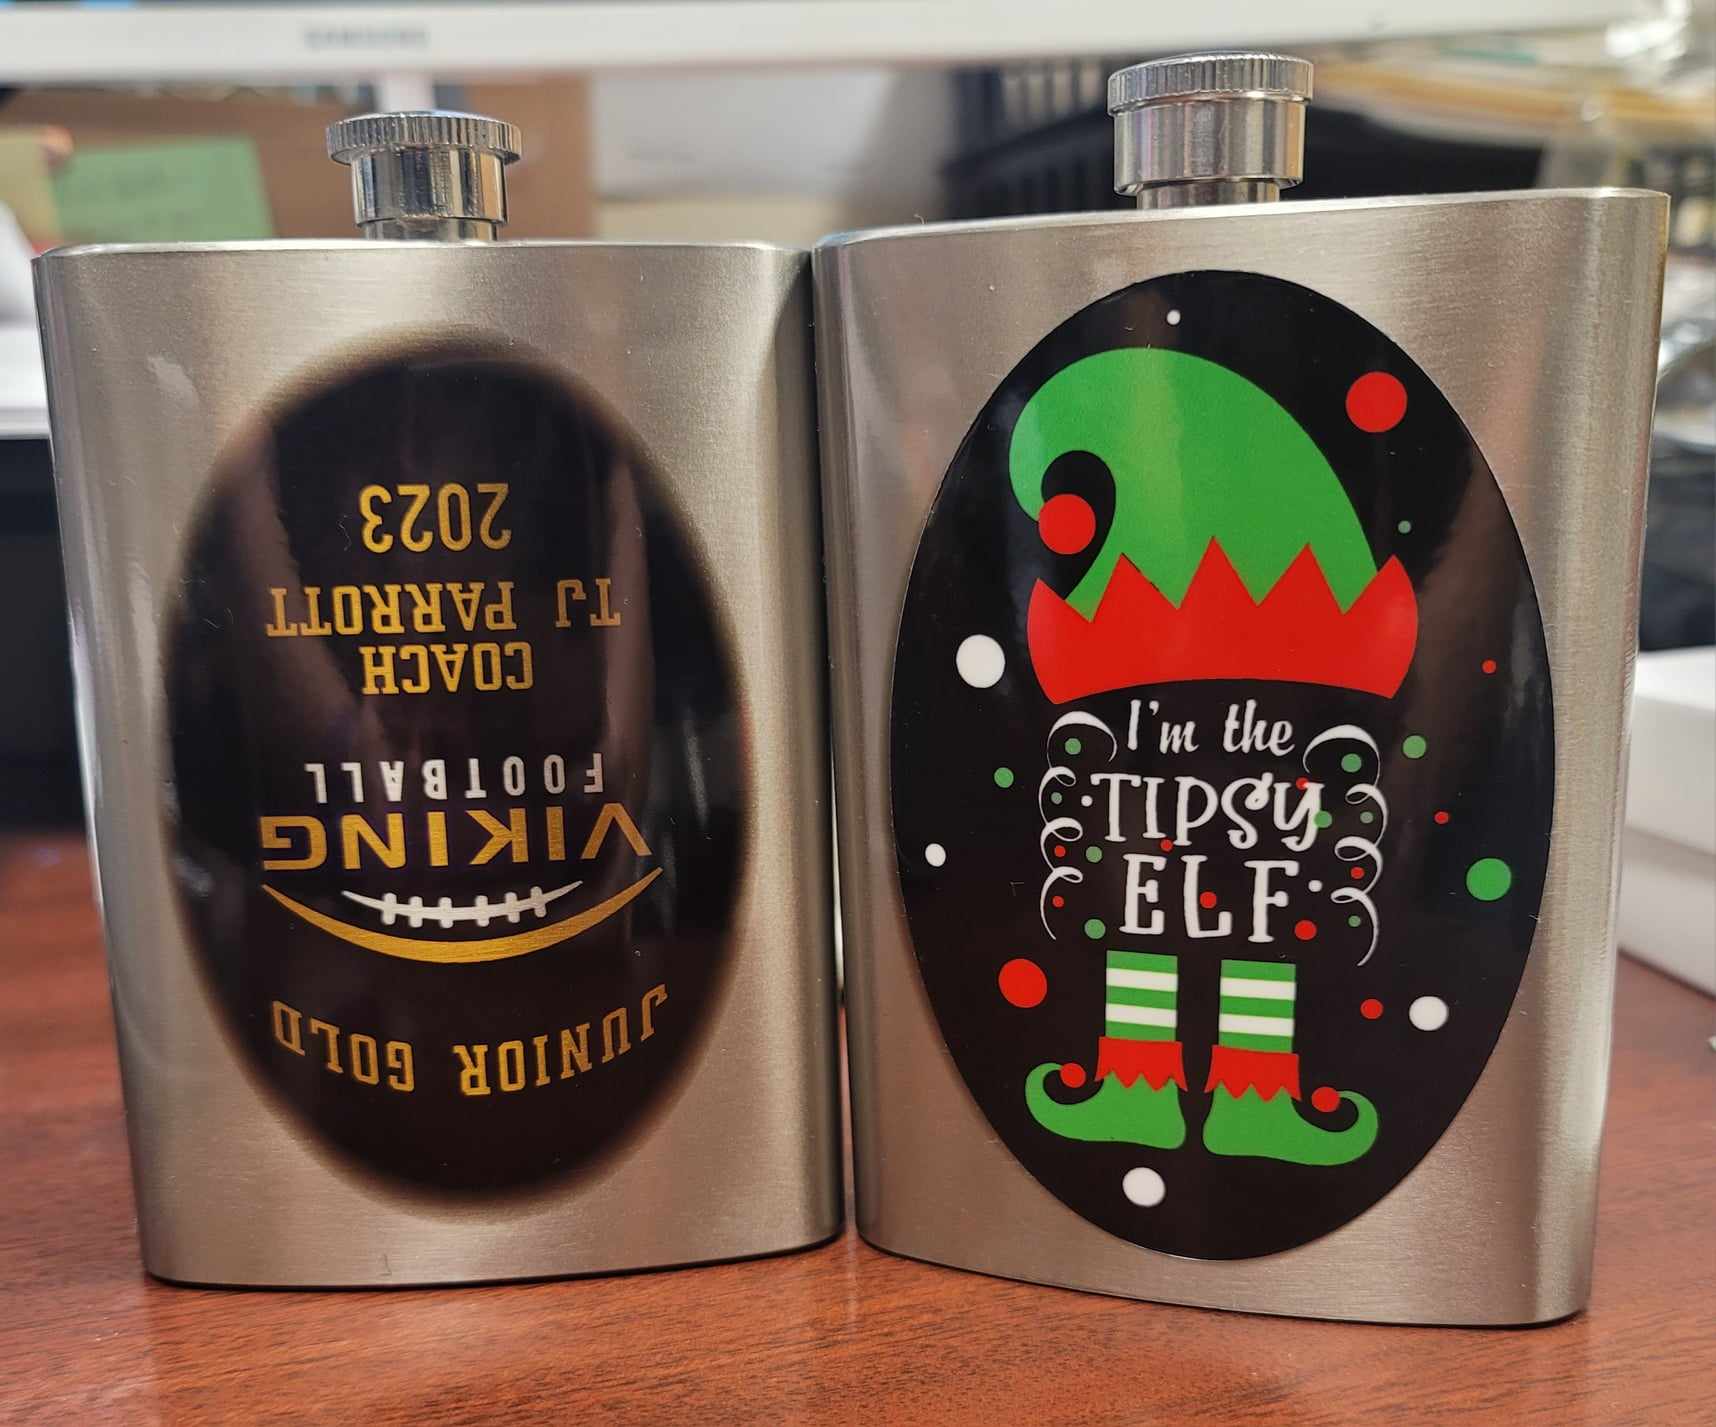 Fun with Flasks made with sublimation printing